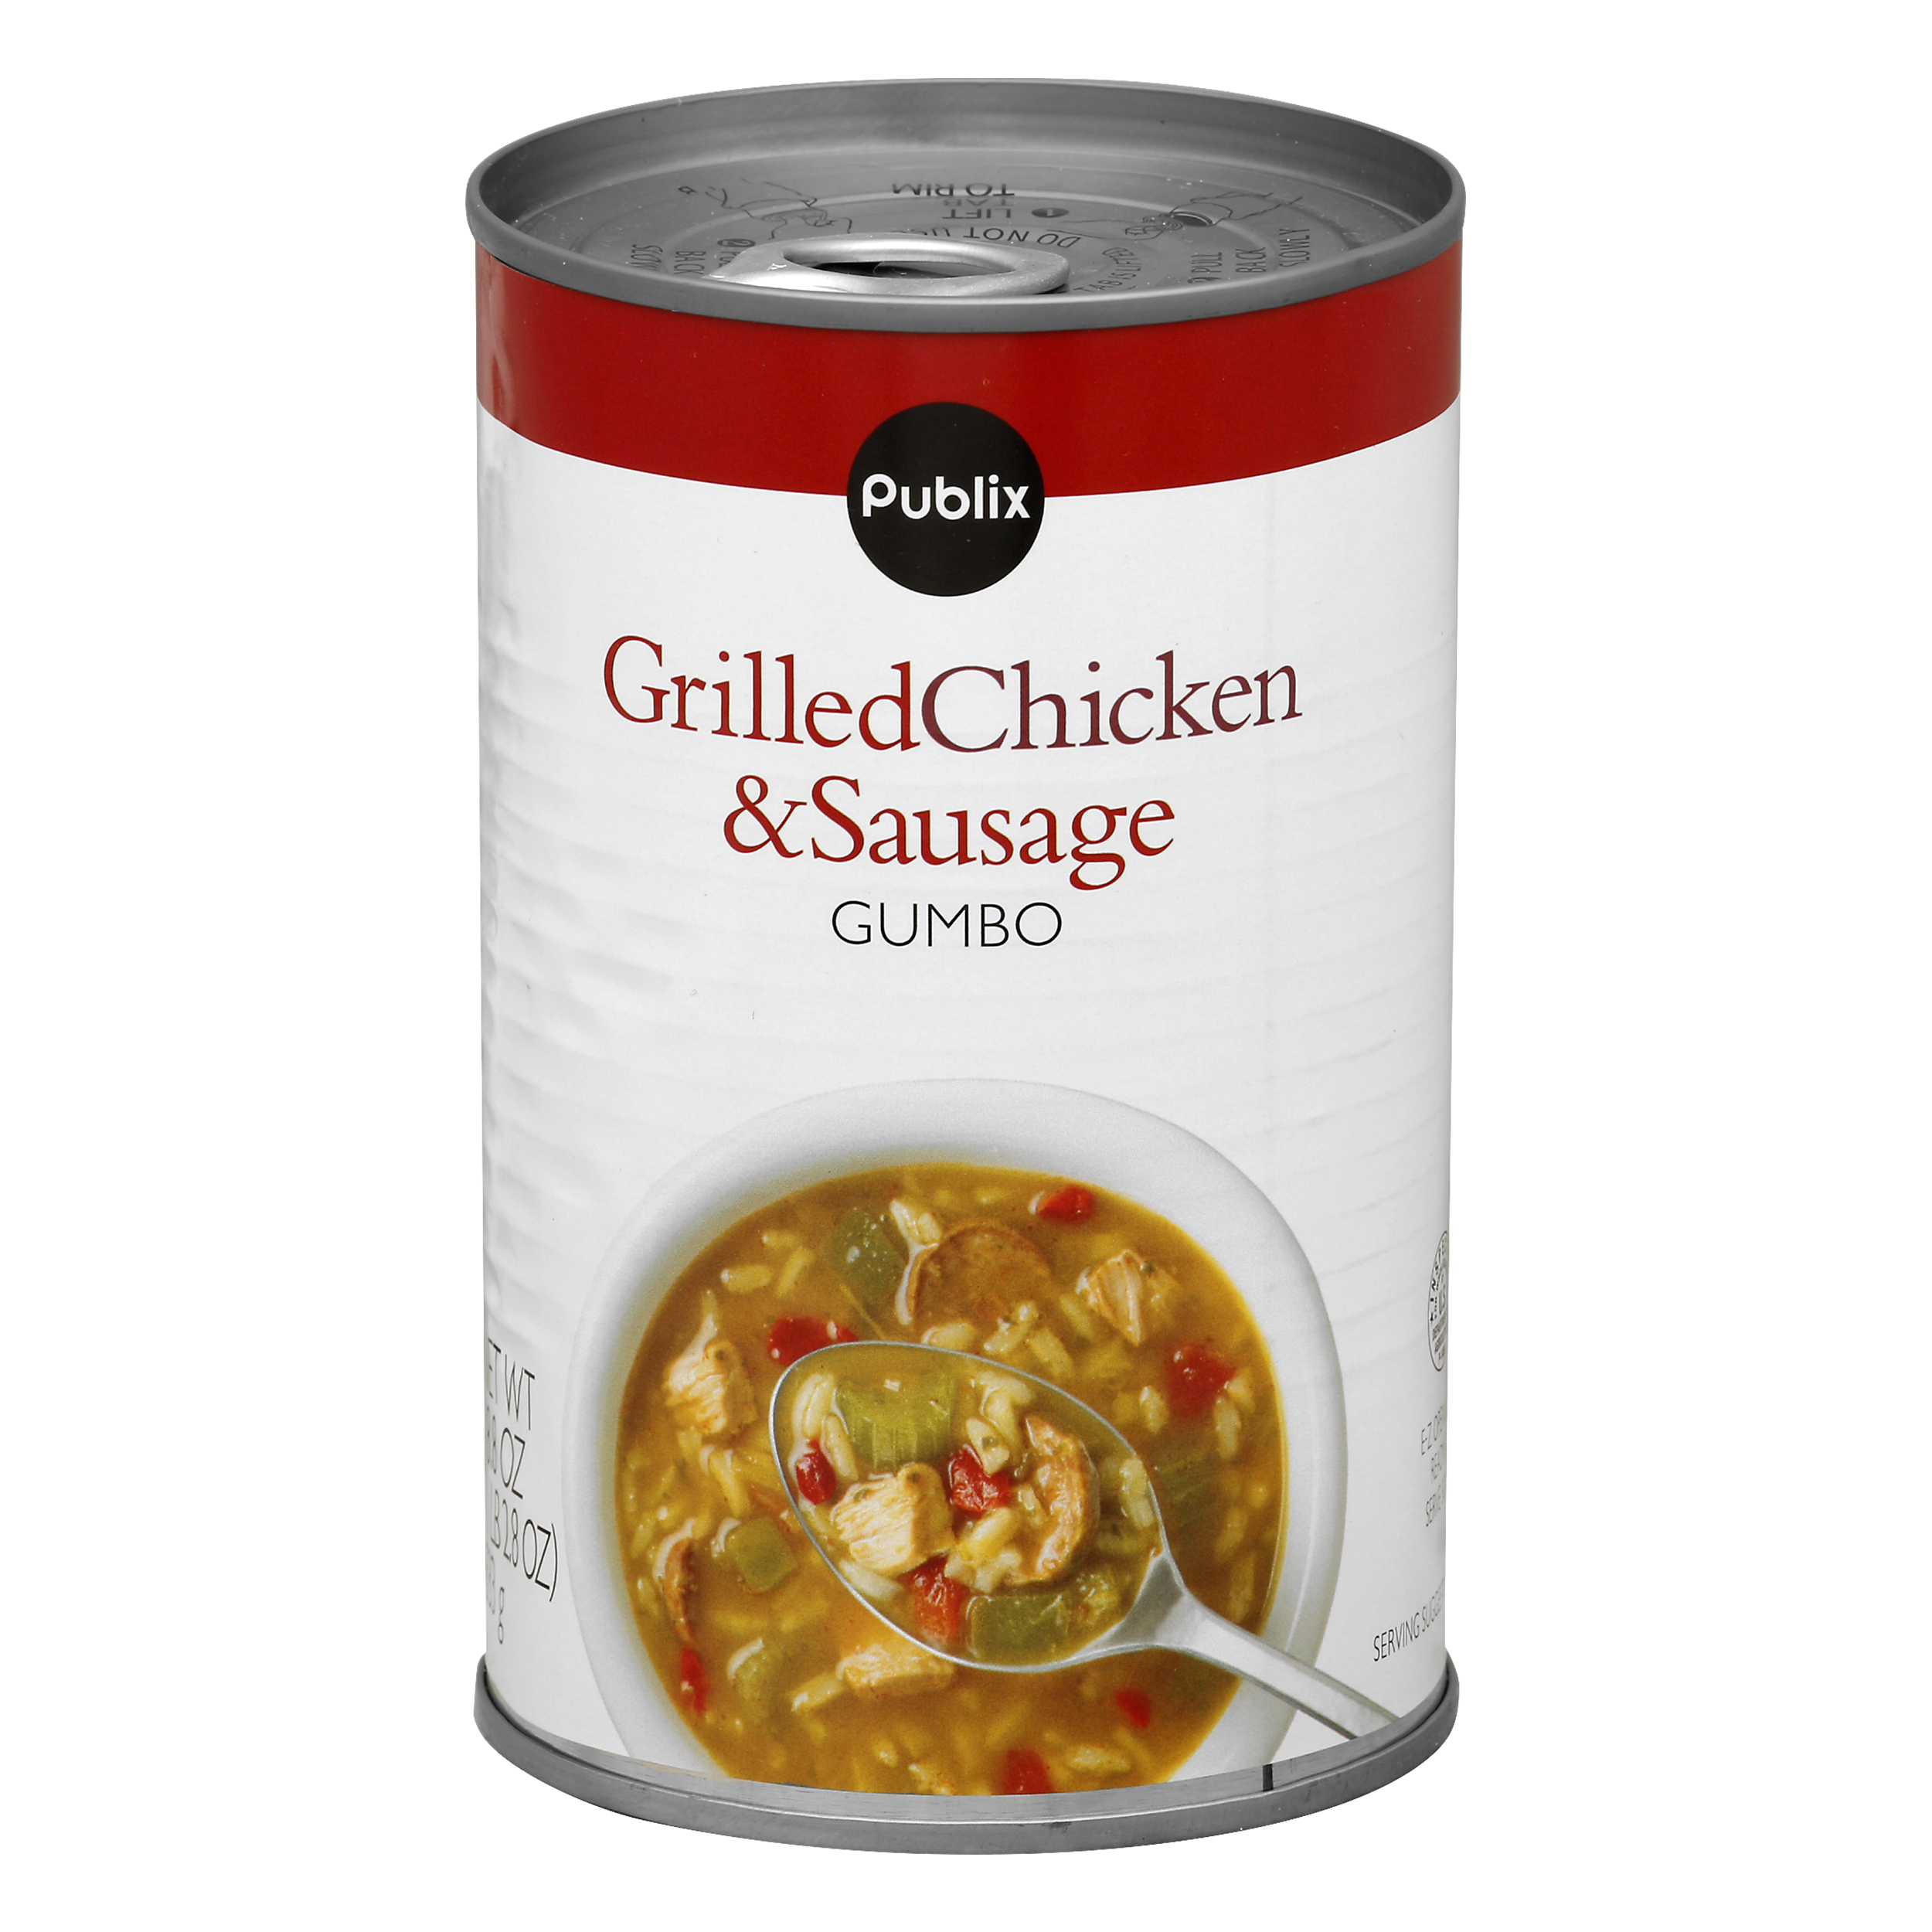 Chicken and Sausage Gumbo – The Cooking Wine-O